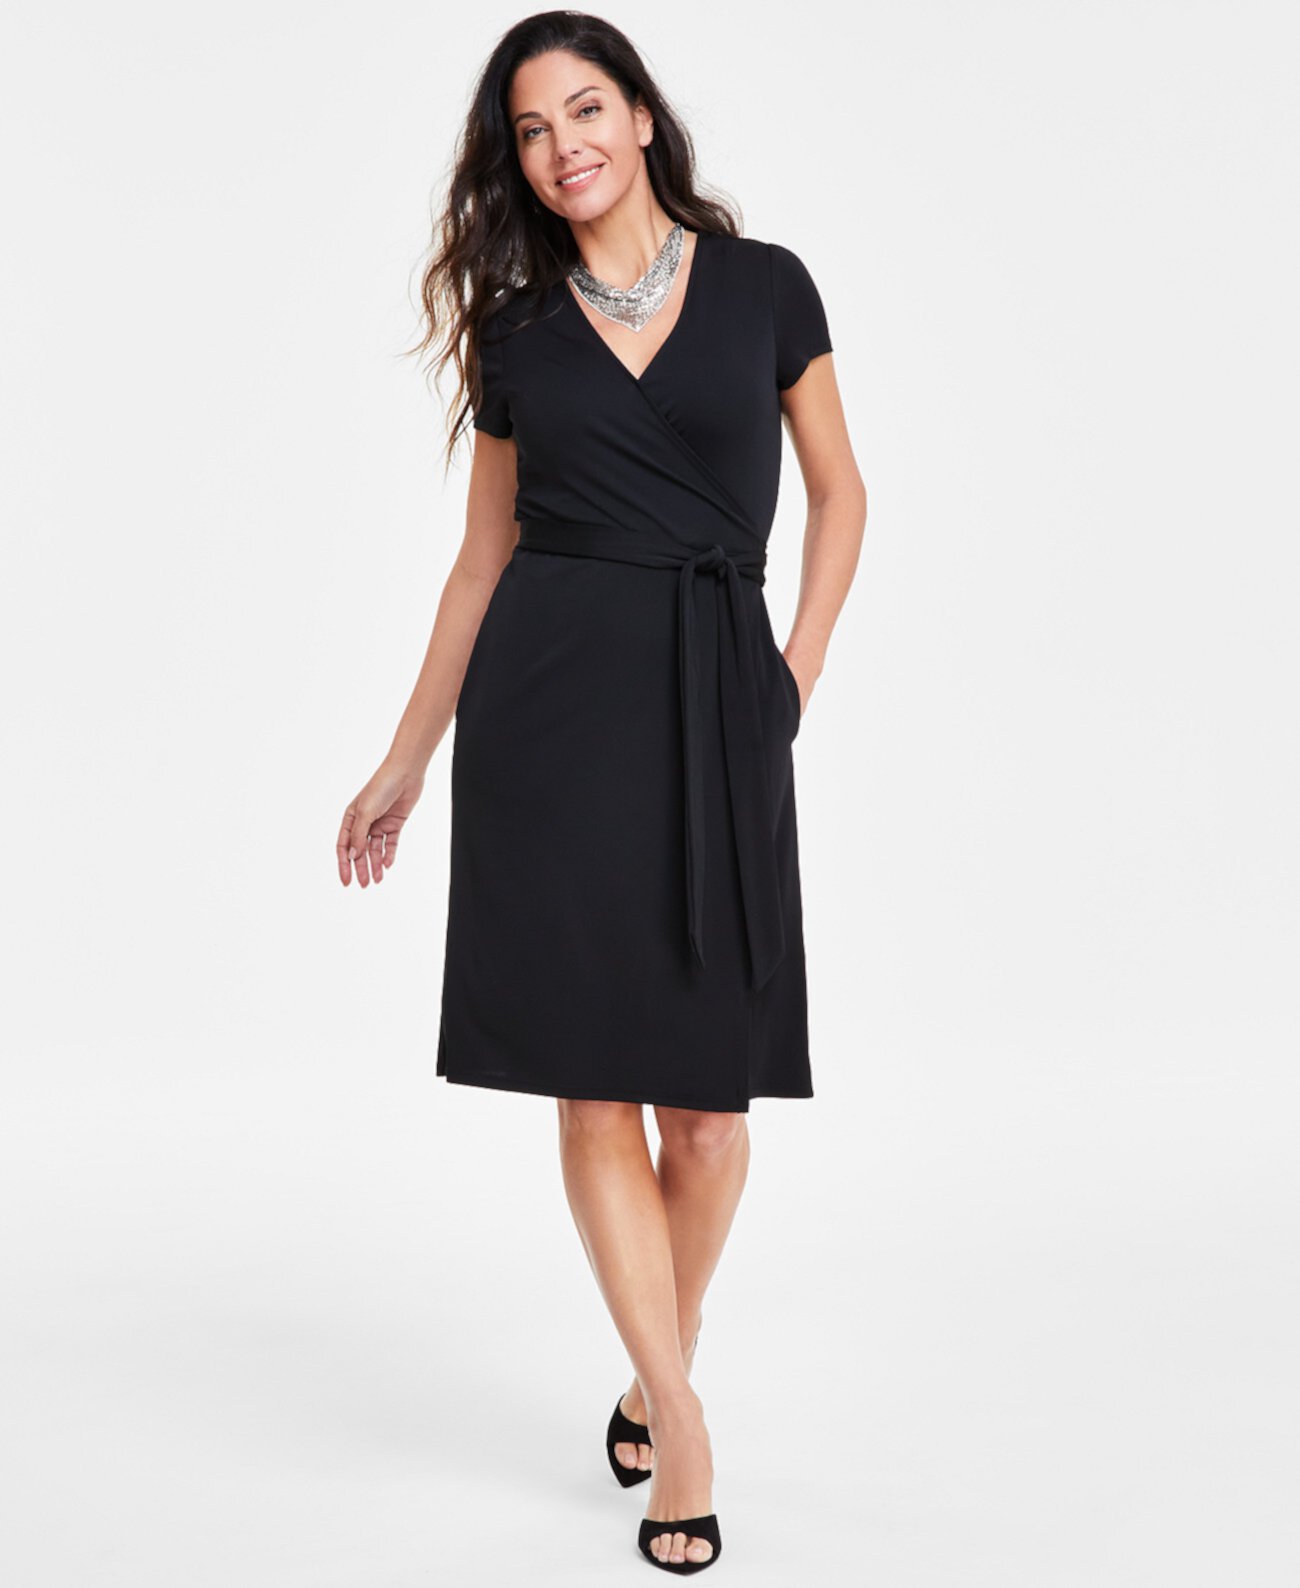 Women's Wrap Dress, Created for Macy's I.N.C. International Concepts